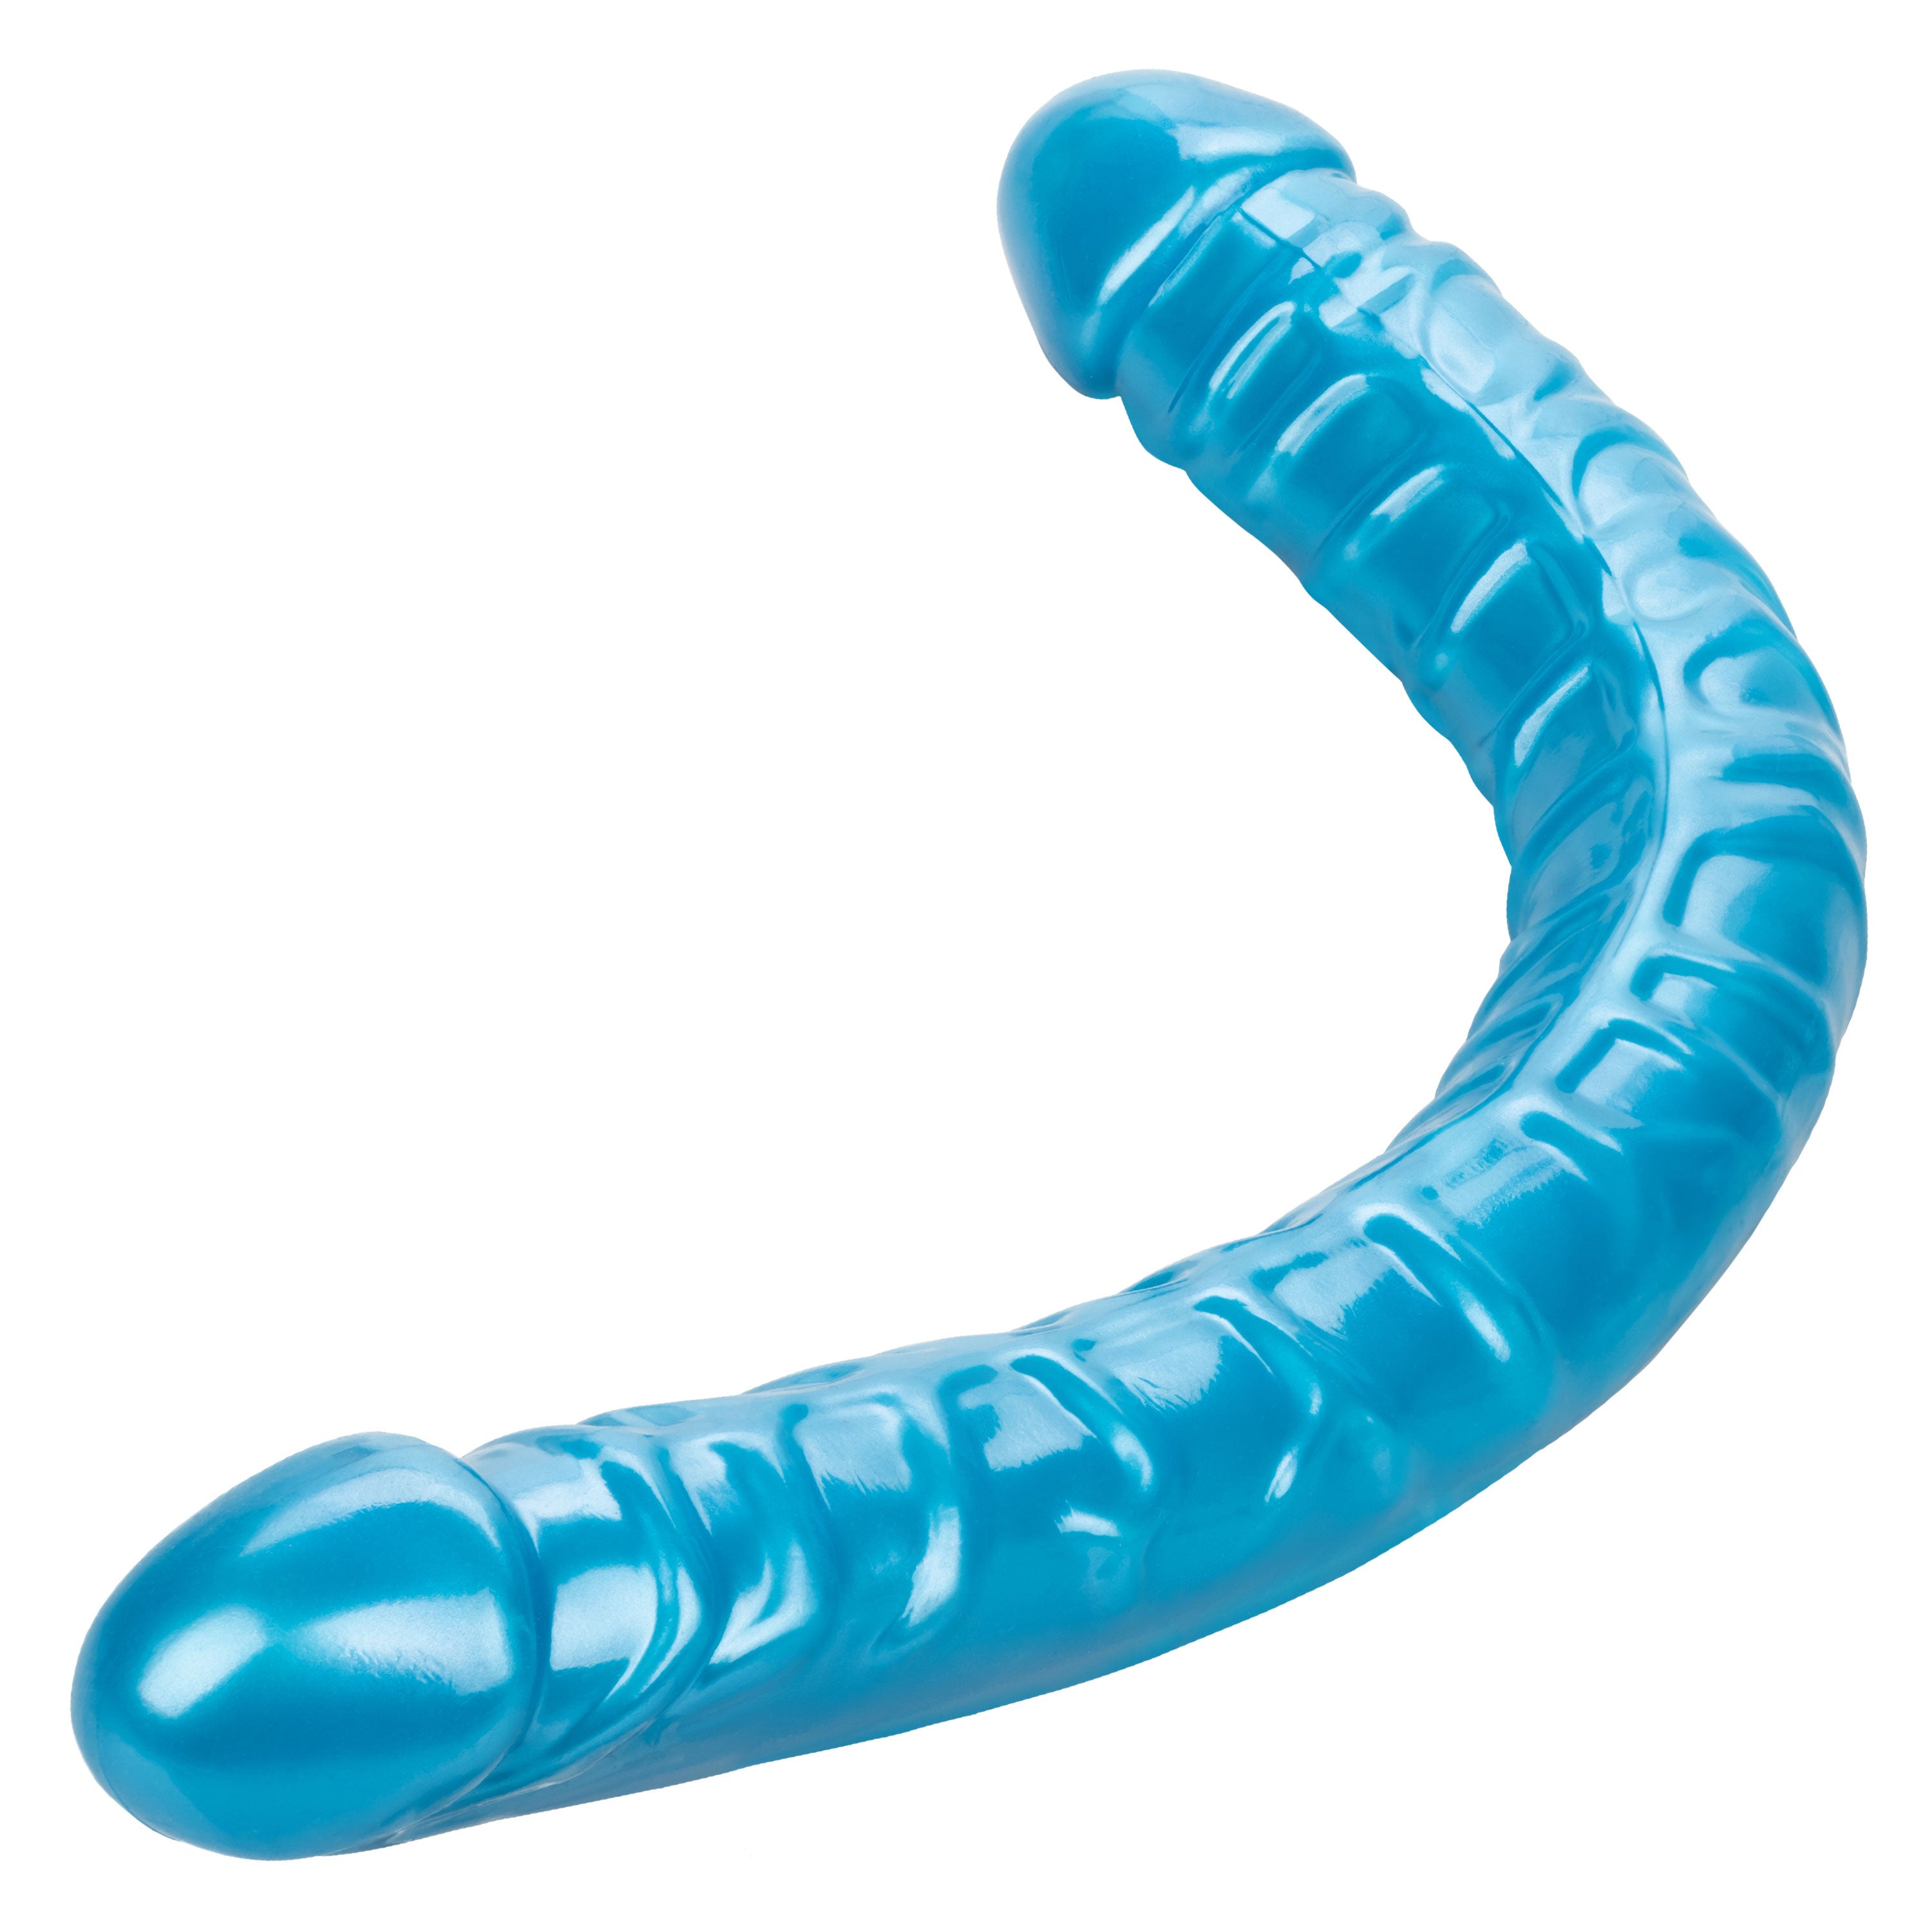 Size Queen 17-inch Double-Ended Dong in Blue: Ultimate Dual Pleasure Awaits